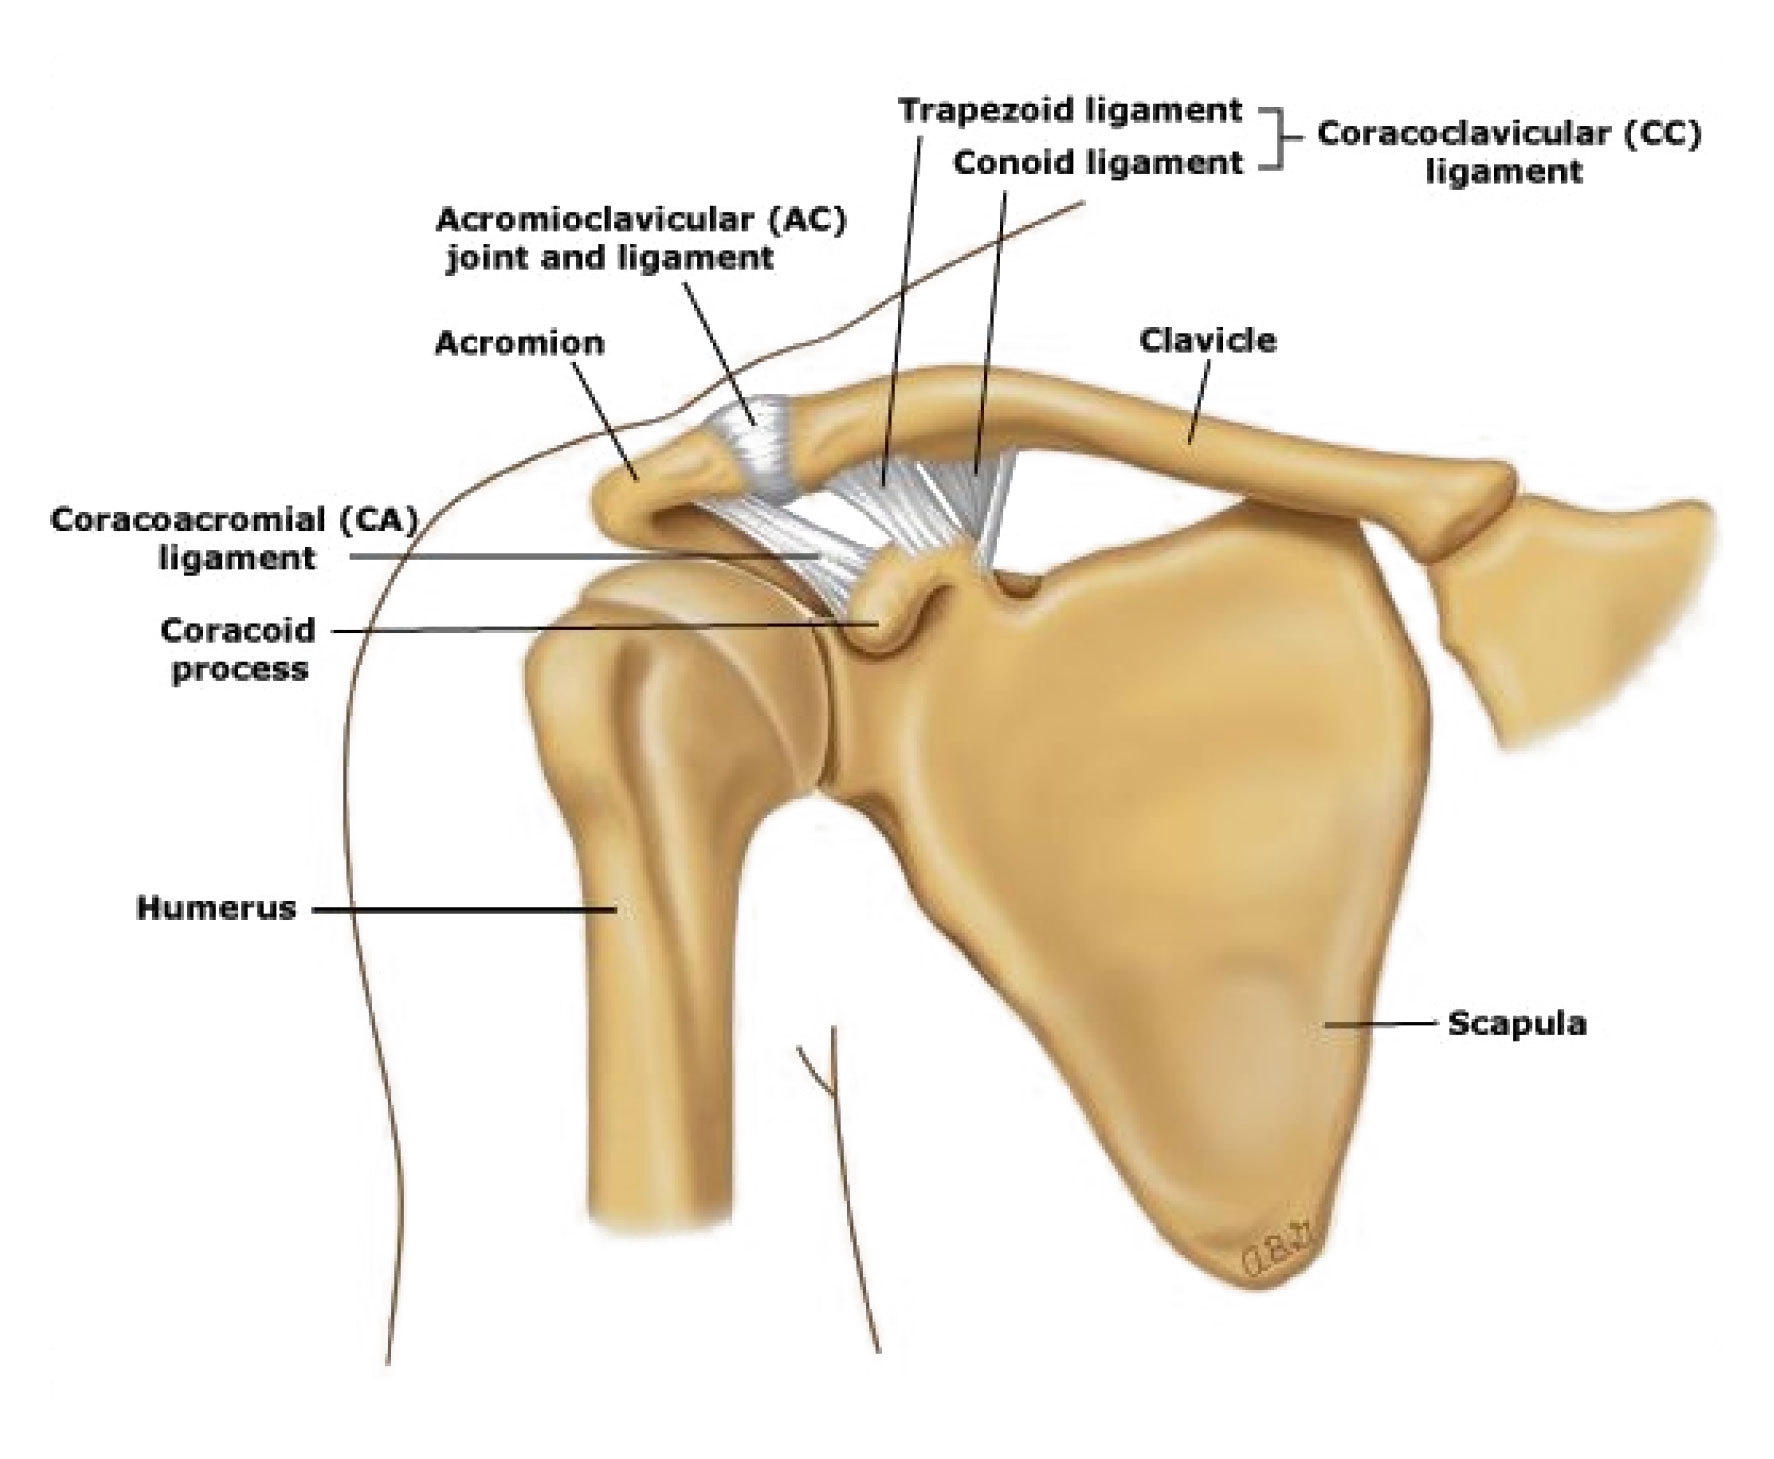 Medical illustration showing the anatomy of the shoulder joint including ligaments and bones.